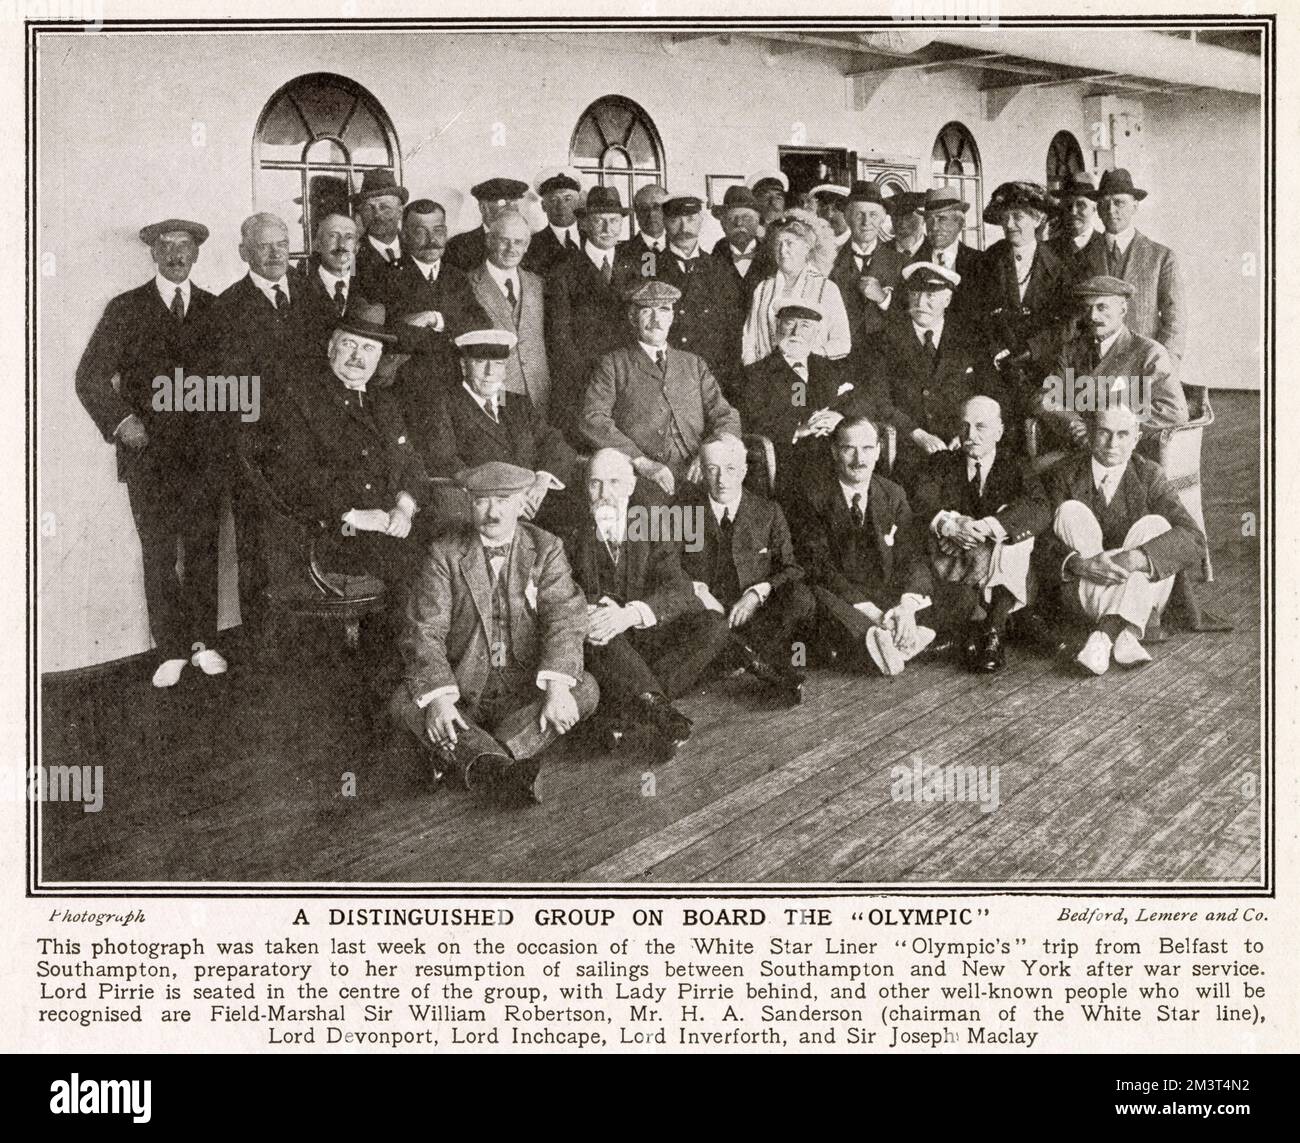 A group taken on board the White Star Line ship 'Olympic' during a trip from Belfast to Southampton in June 1920. Notable among the sitters is Lord Pirrie in the centre, with Lady Pirrie behind. Also in the picture is Field-Marshal Sir William Robertson, Mr. H. A. Sanderson (chairman of White Star Line), Lord Devonport, Lord Inchcape, Lord Inverforth and Sir Joseph McKay. Stock Photo